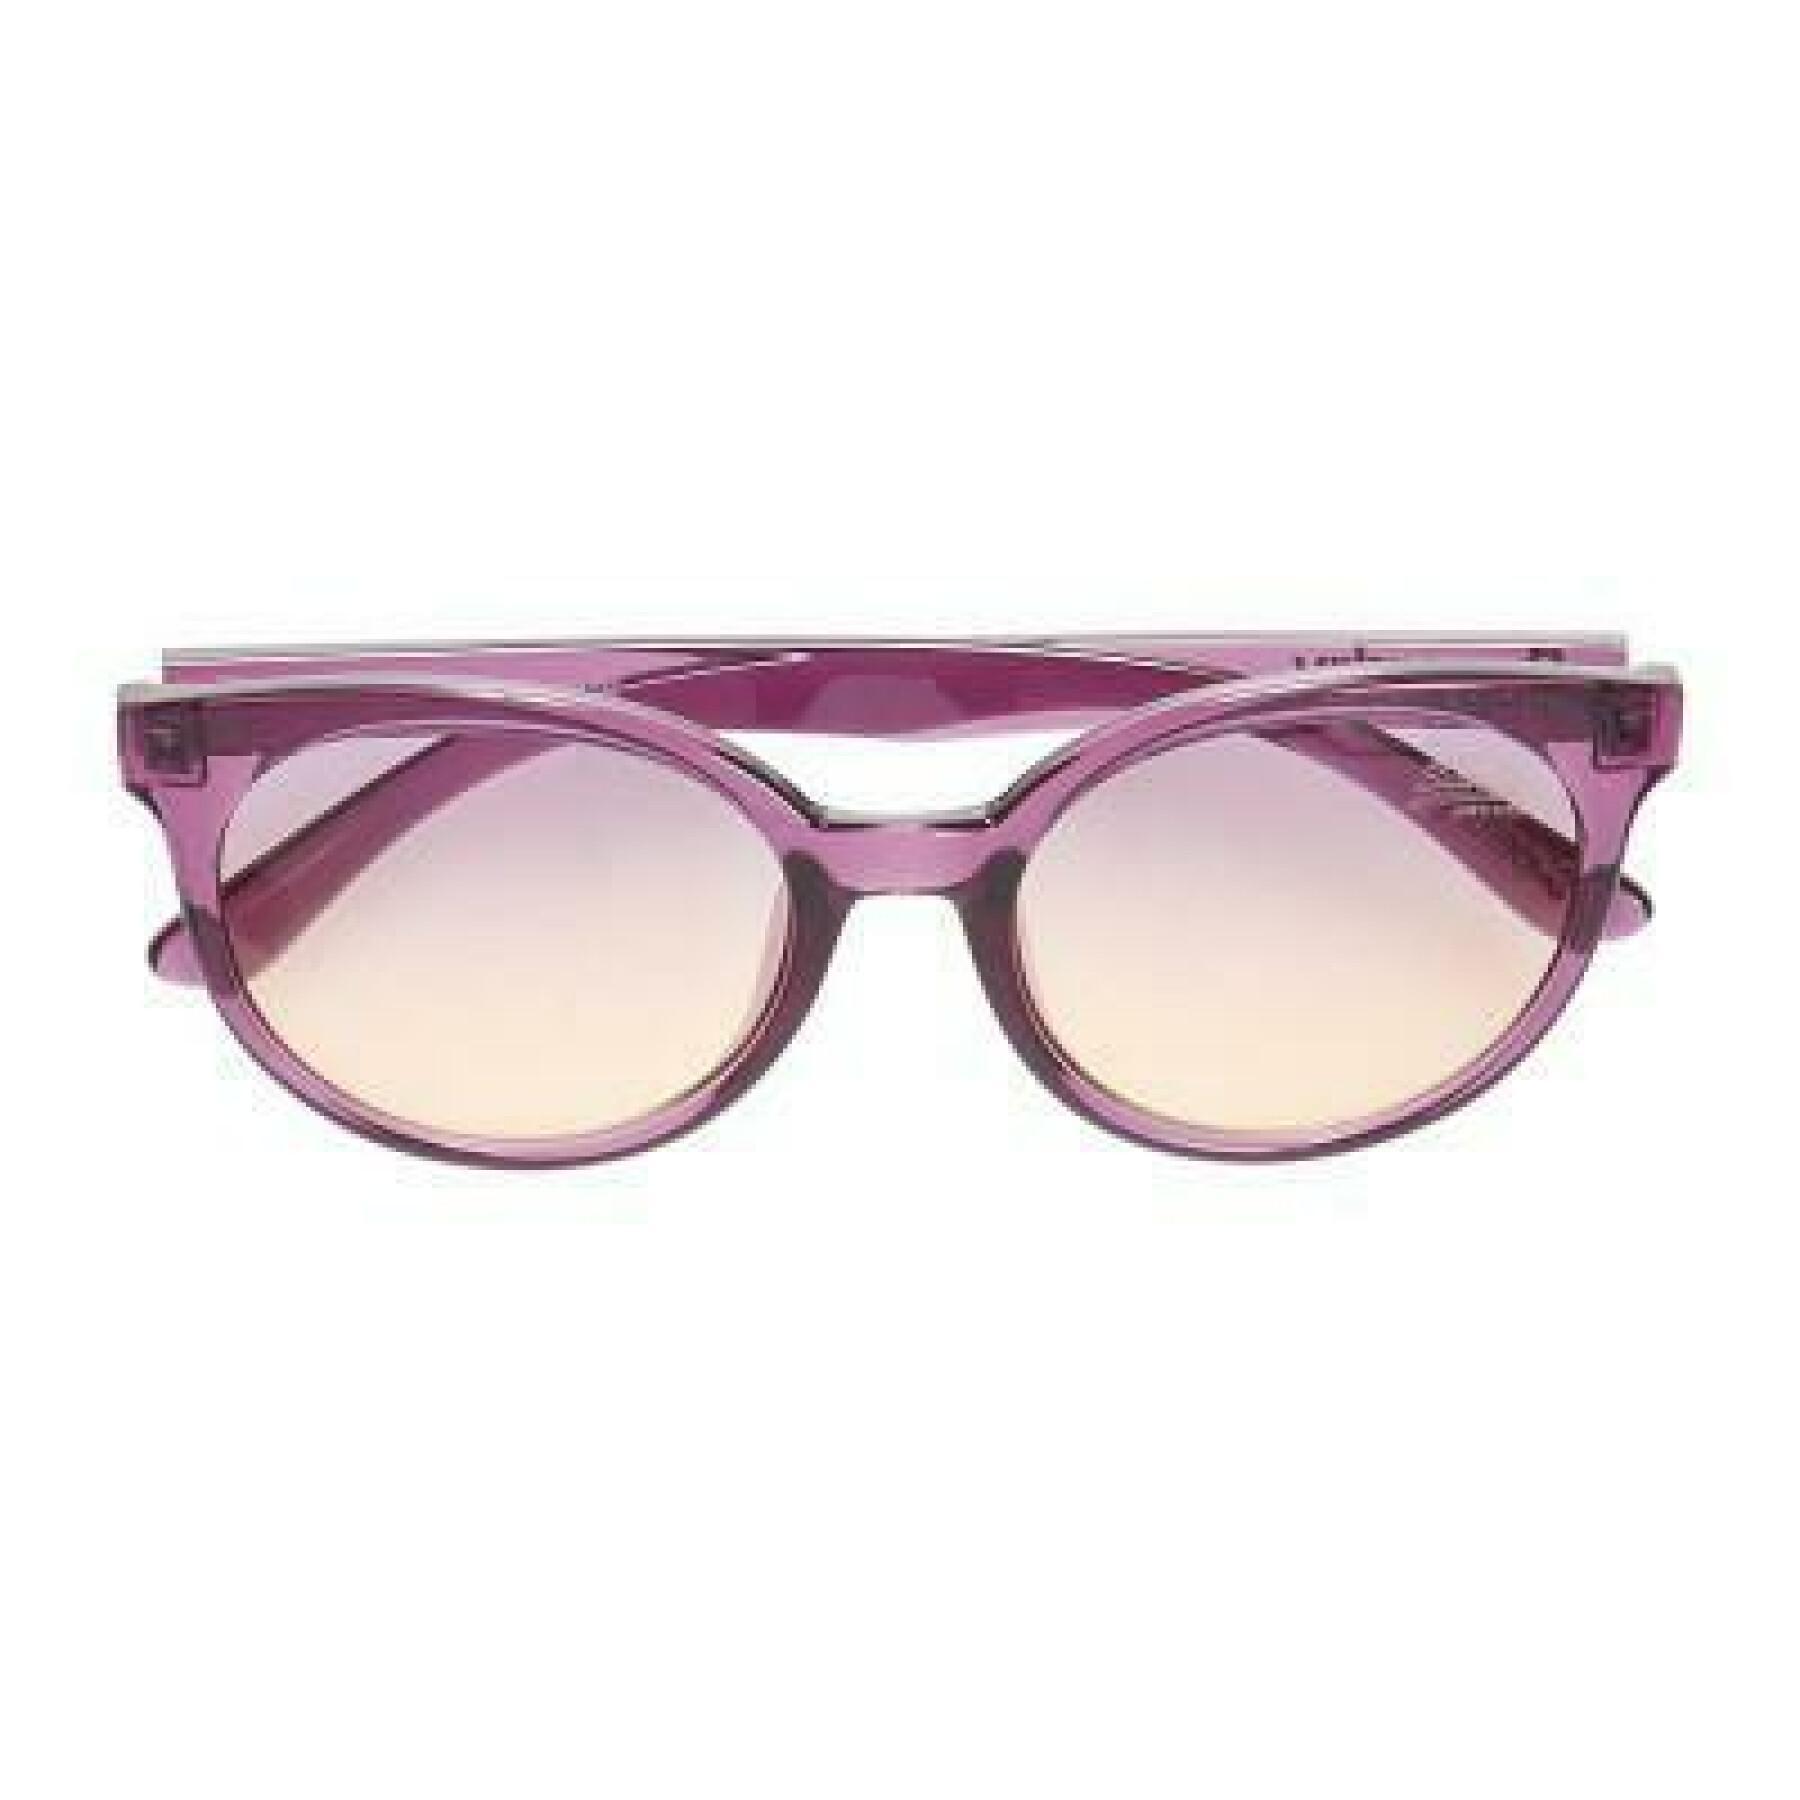 Women's glasses Superdry Pussy Cat